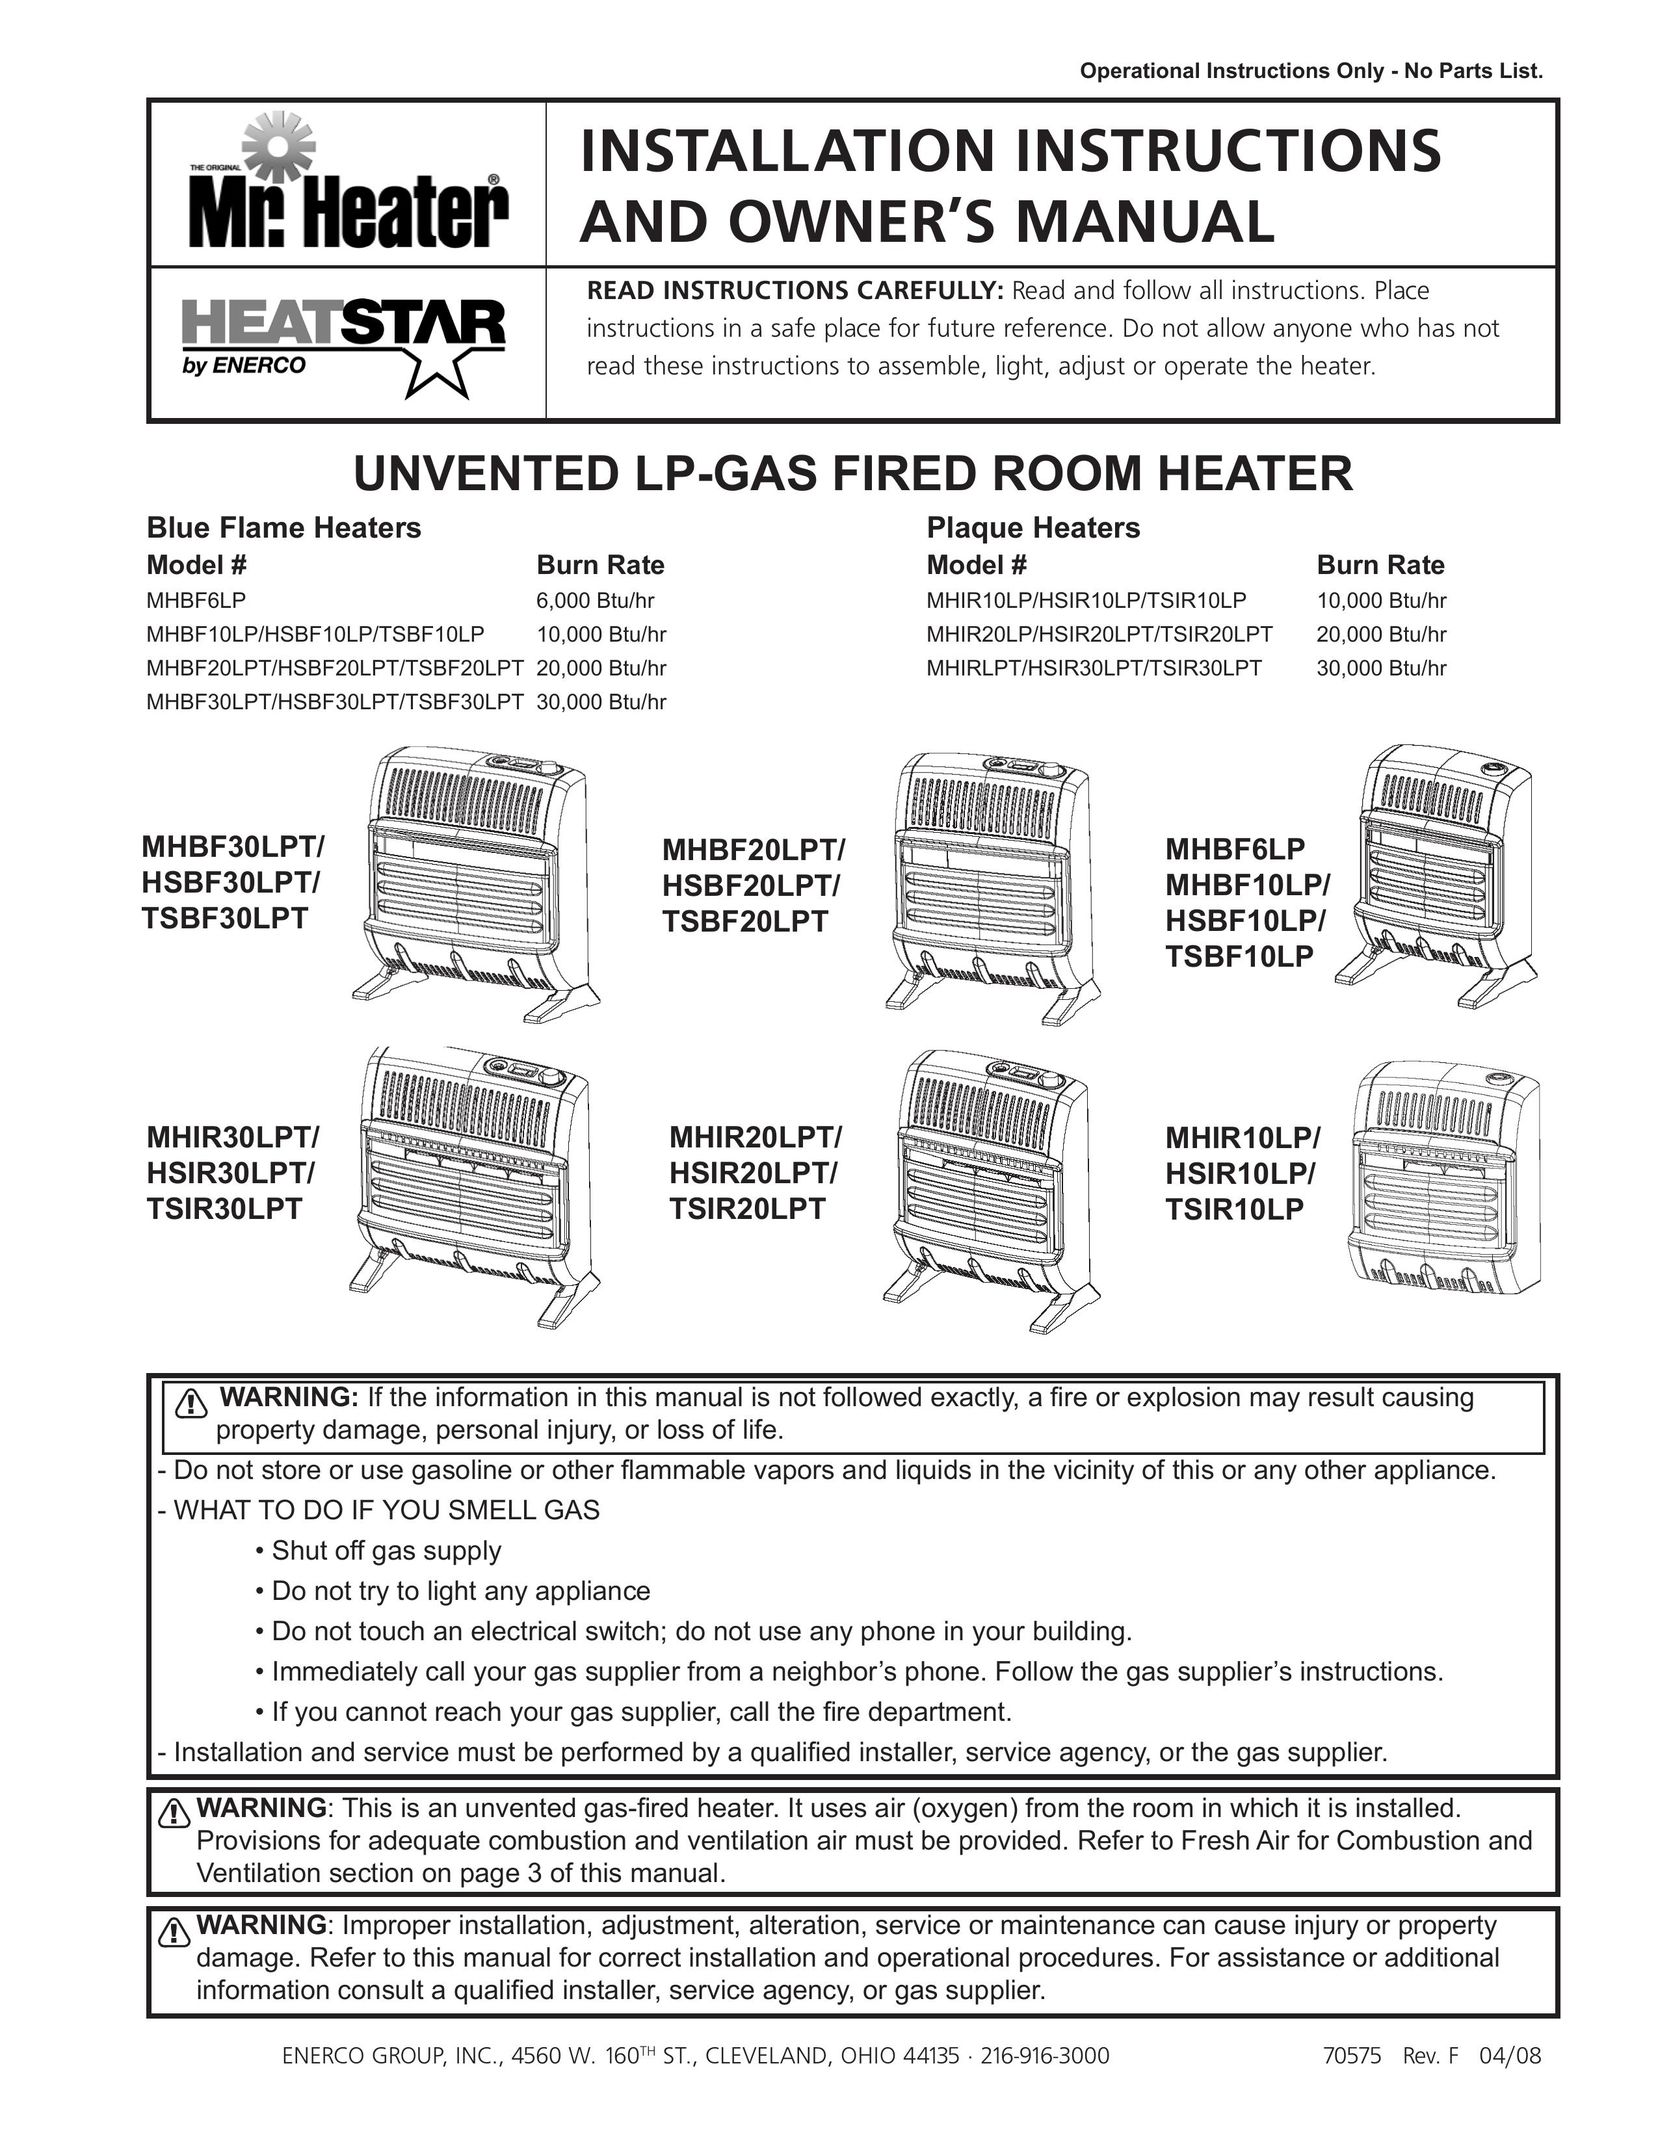 Enerco HSBF10LP Electric Heater User Manual